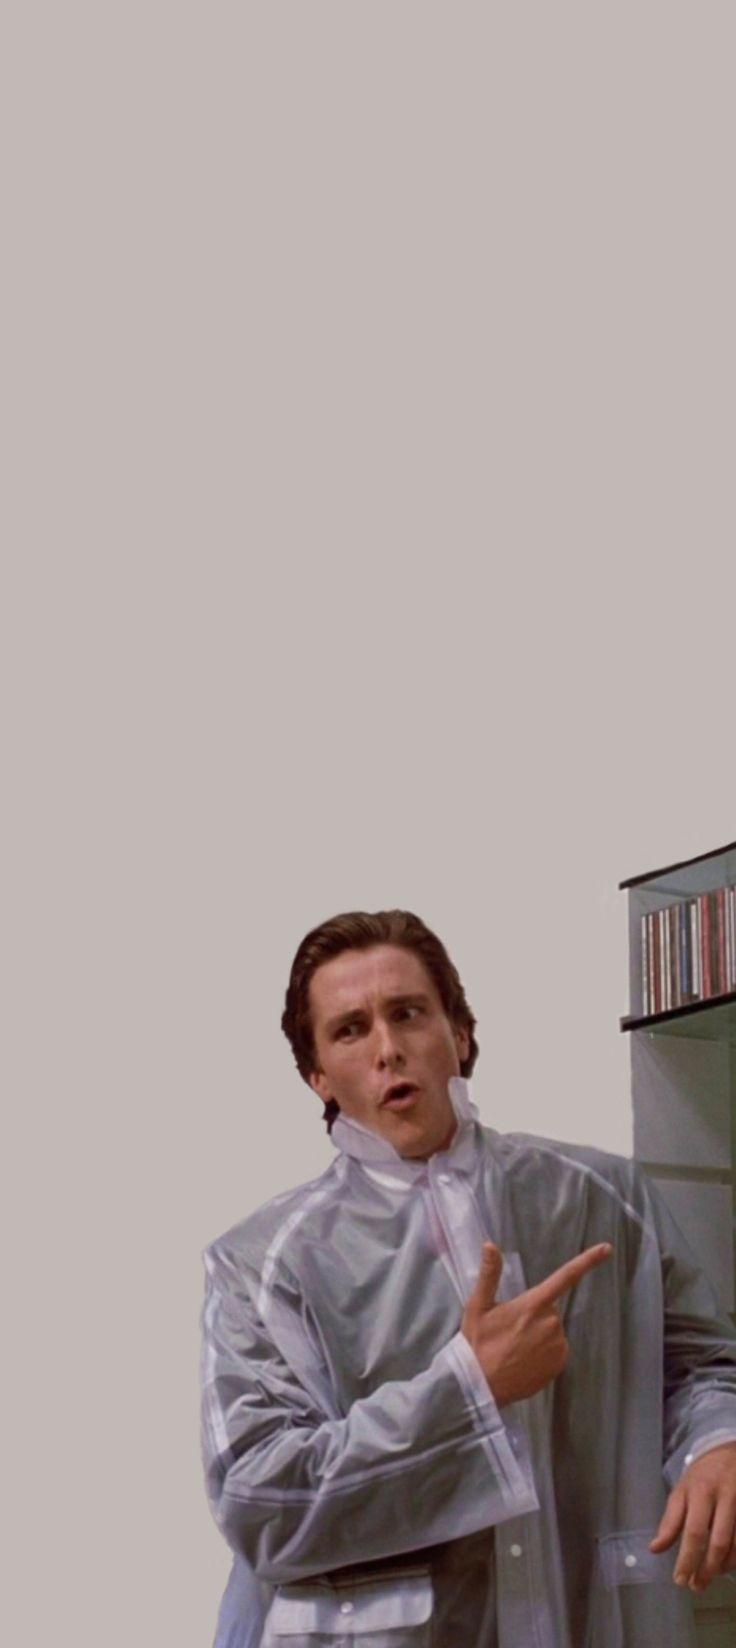 10 American Psycho HD Wallpapers and Backgrounds